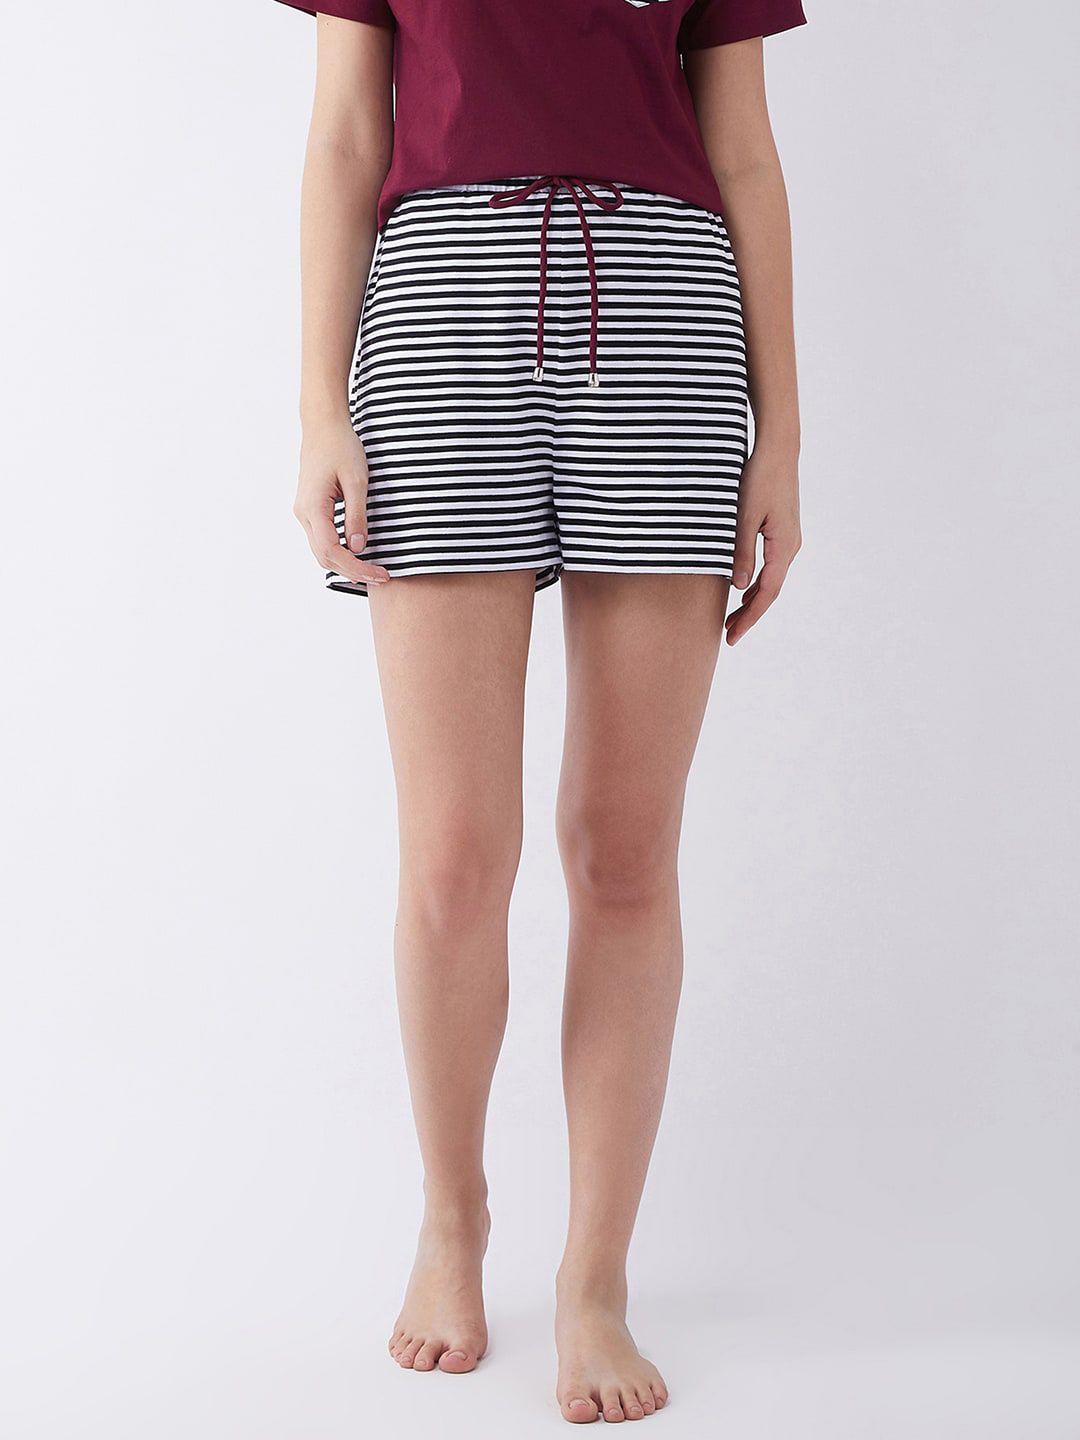 baesd-women-mid-rise-striped-pure-cotton-lounge-shorts